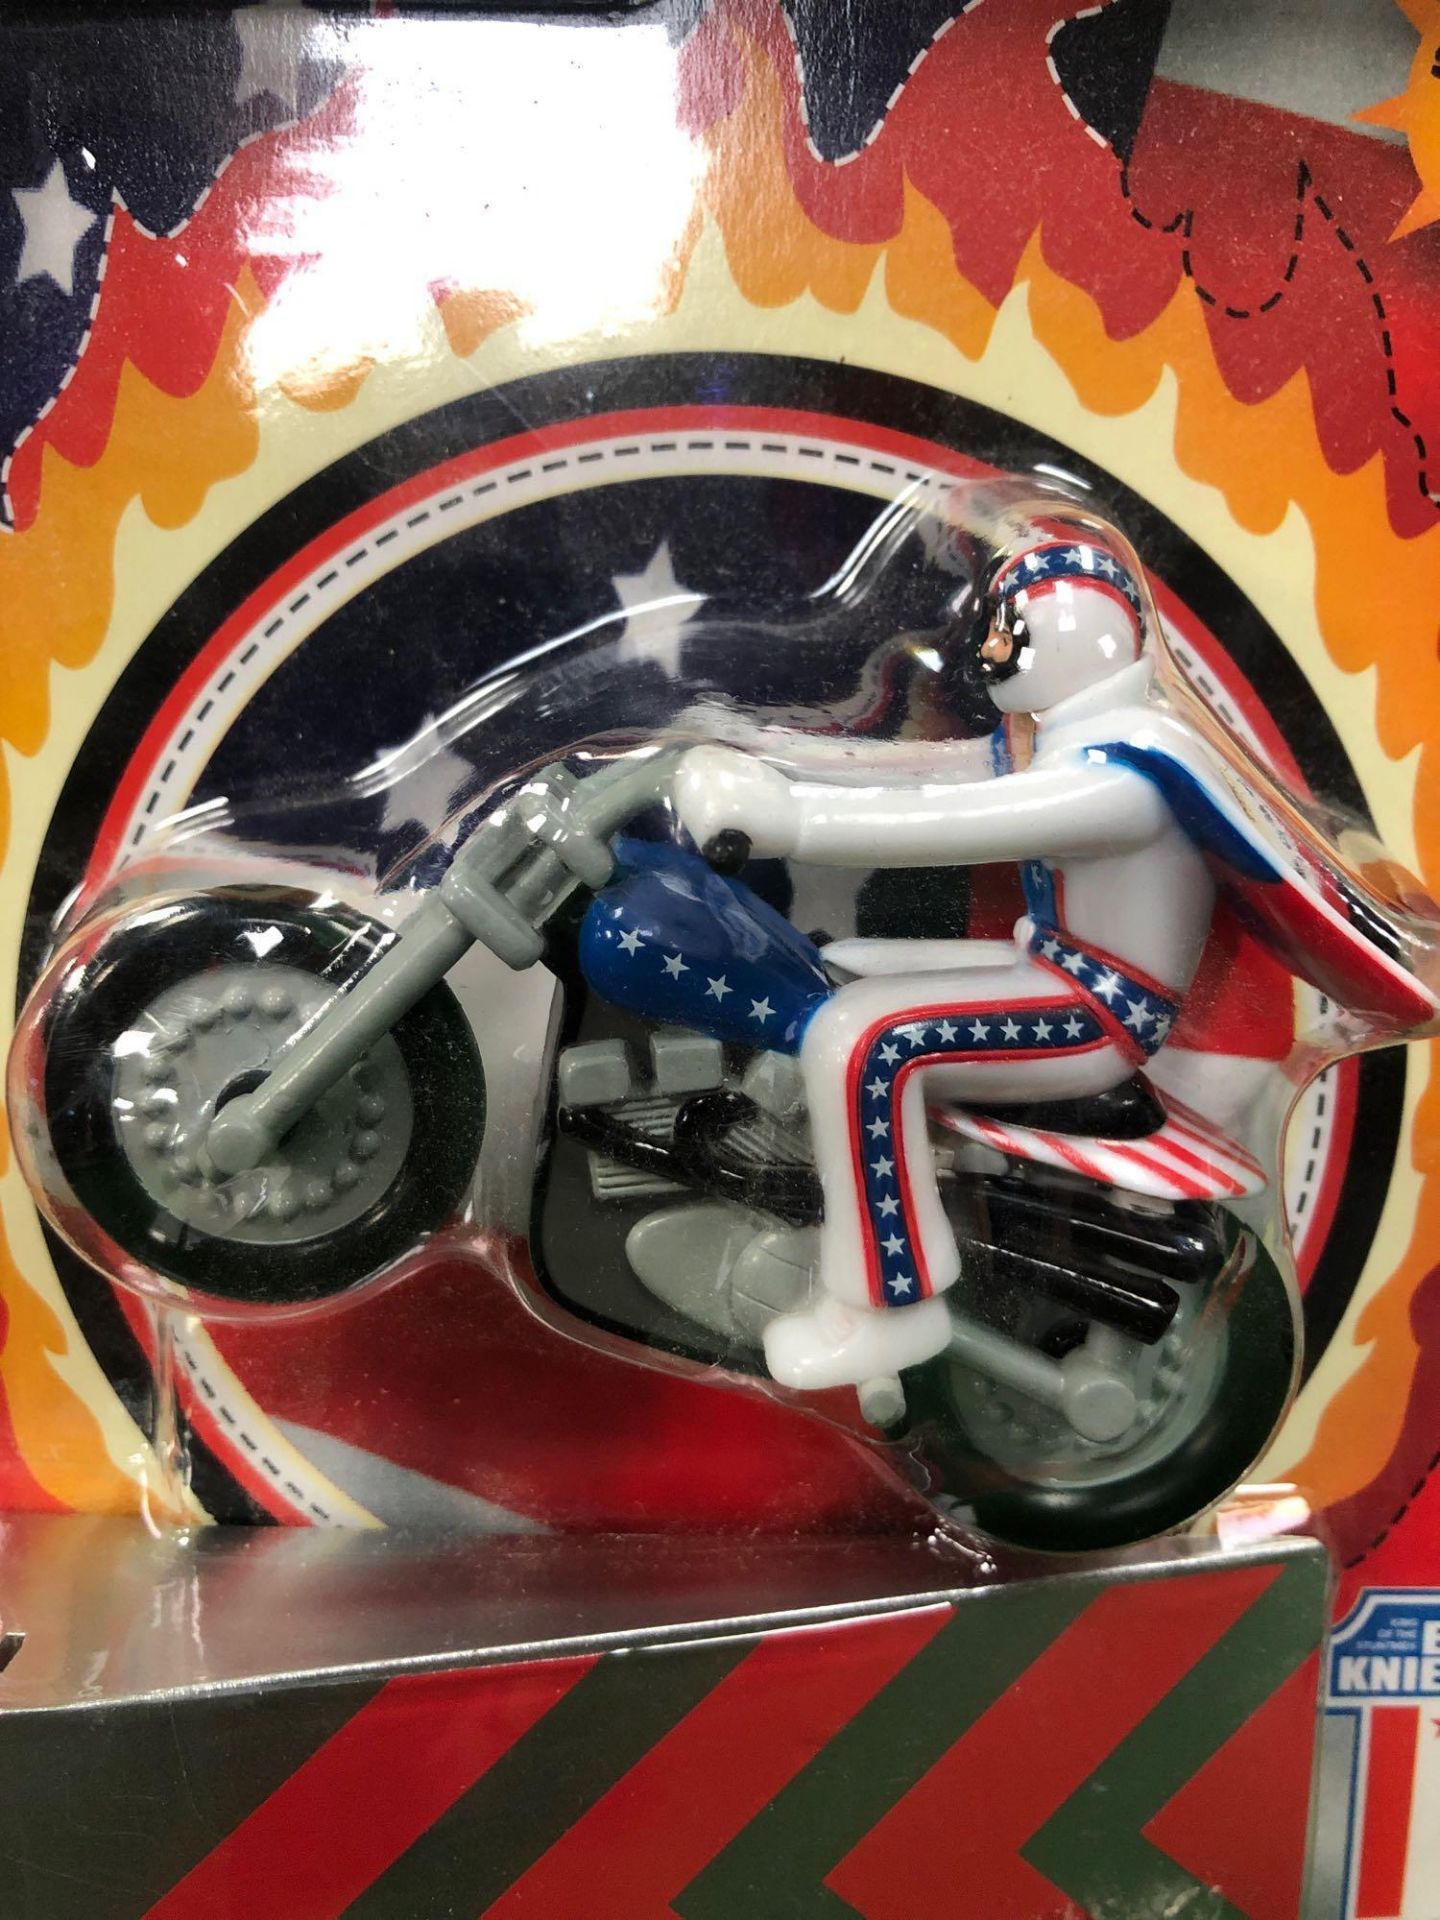 Paladone Evel Knievel And Stunt Bike #PPO226 Issue 1 In Original Packaging - Image 2 of 2